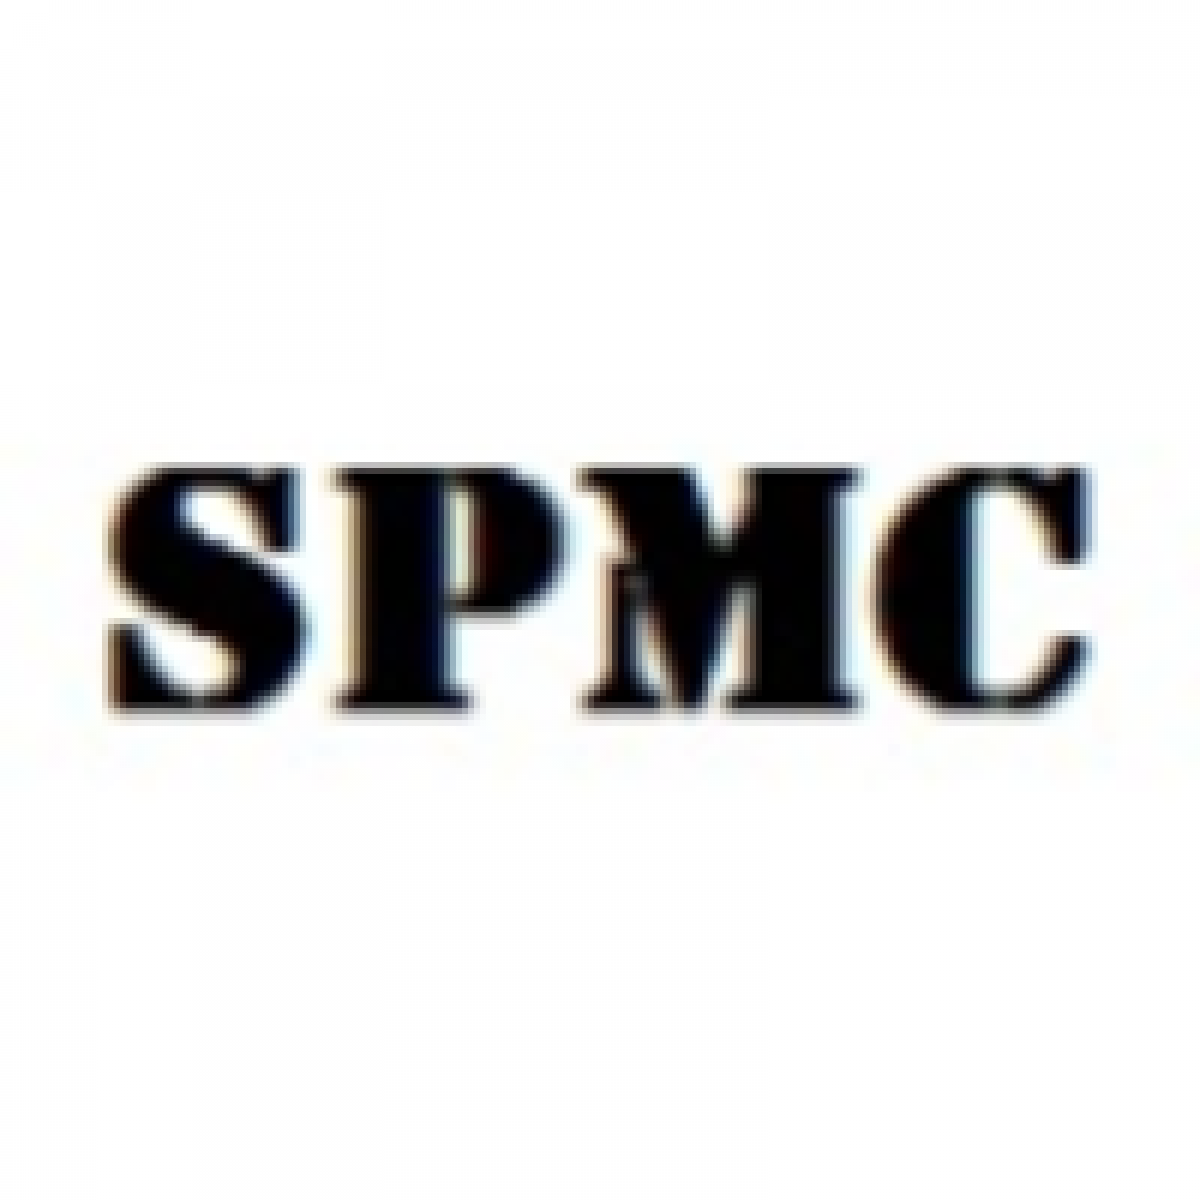 Services, Products and Management Consultants (SPMC-PK)